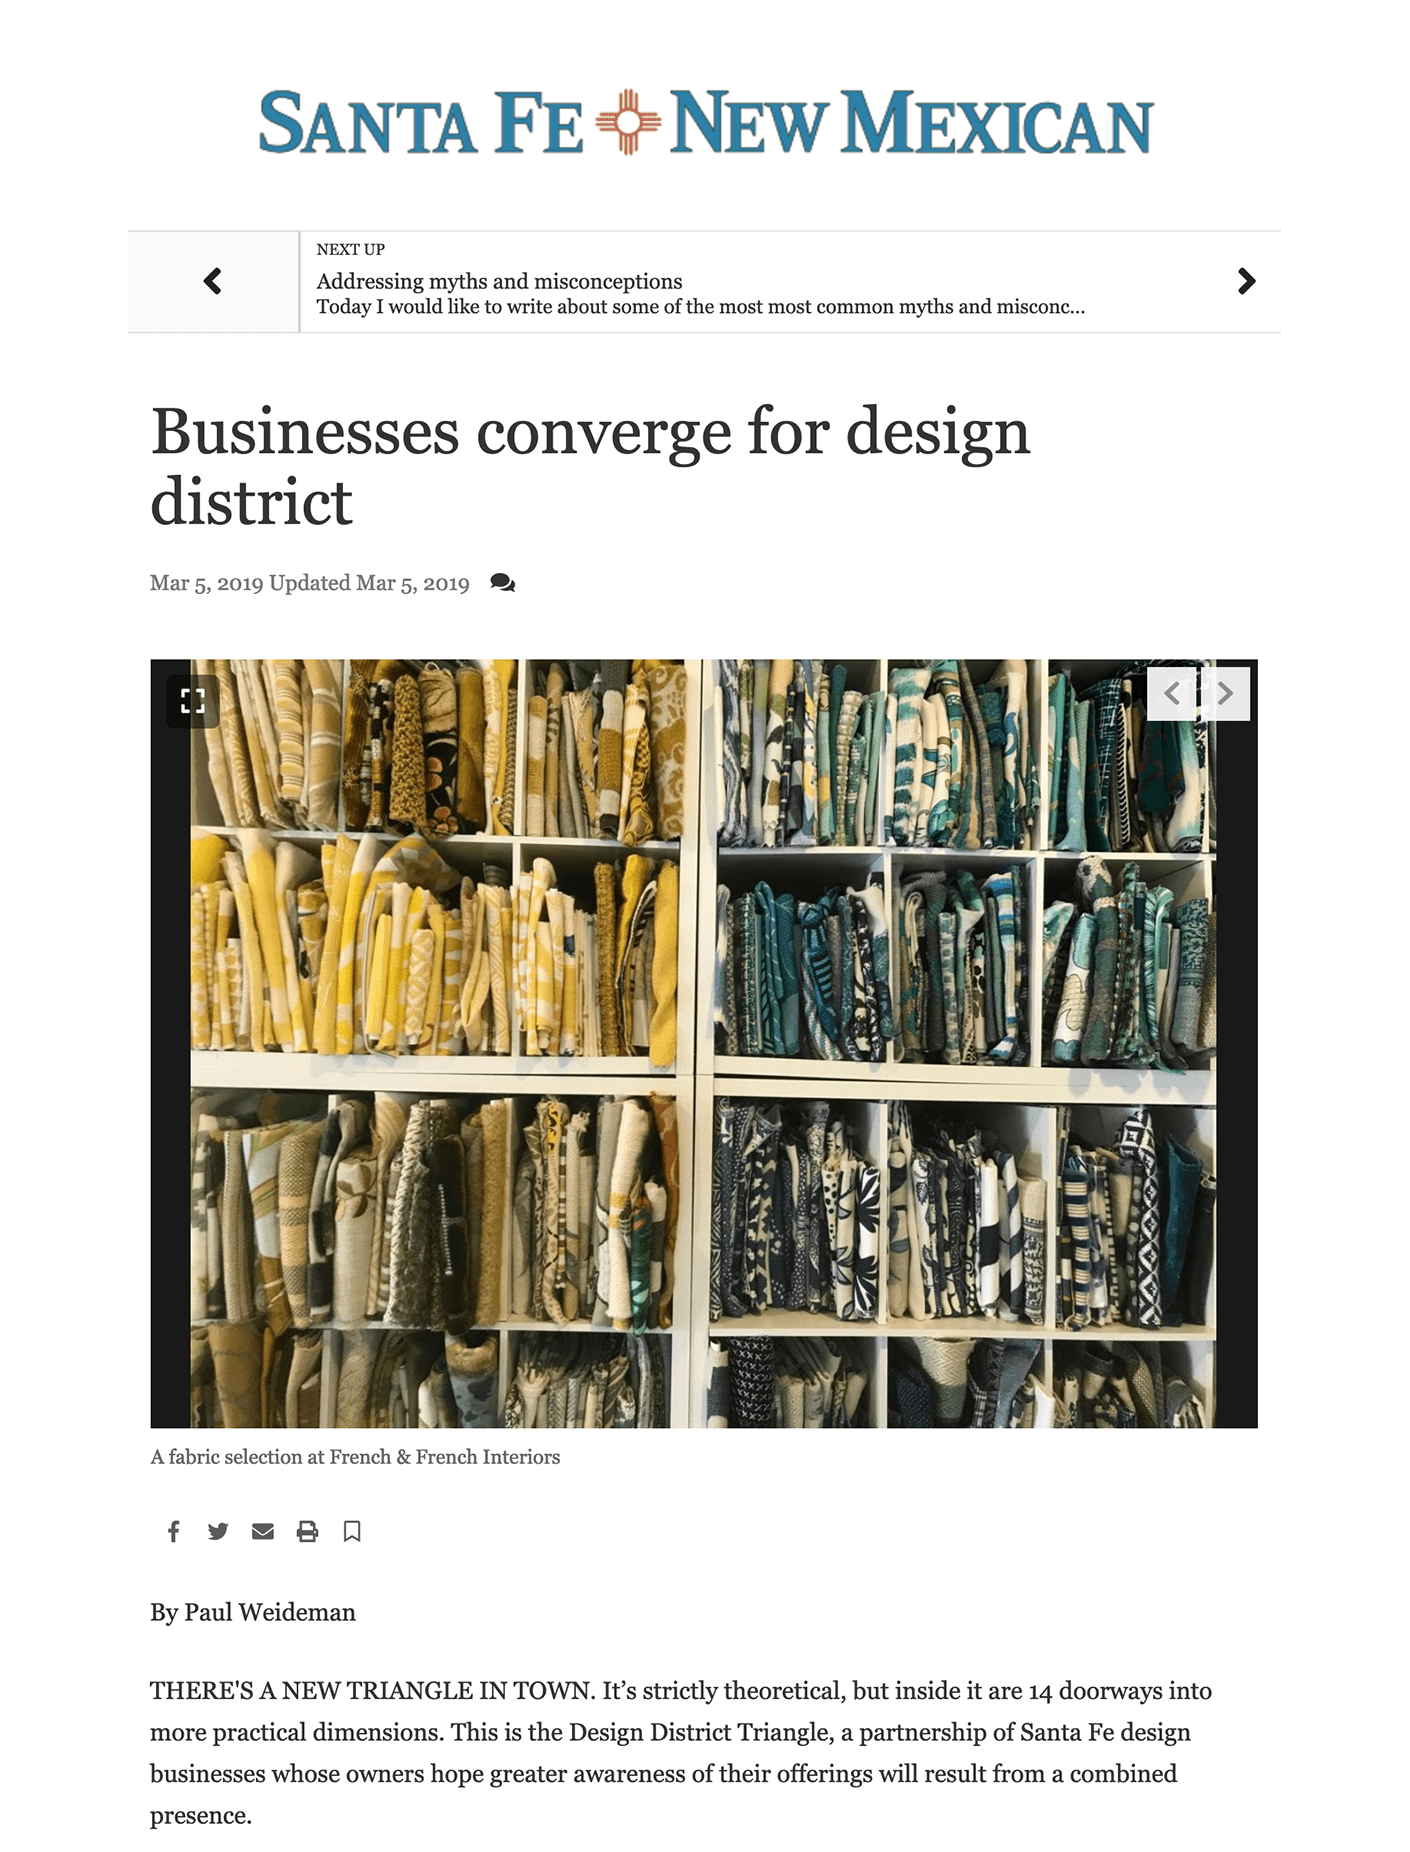 Businesses Converge for Design business coverage for design district santa fe new mexican article featuring french and french interiors